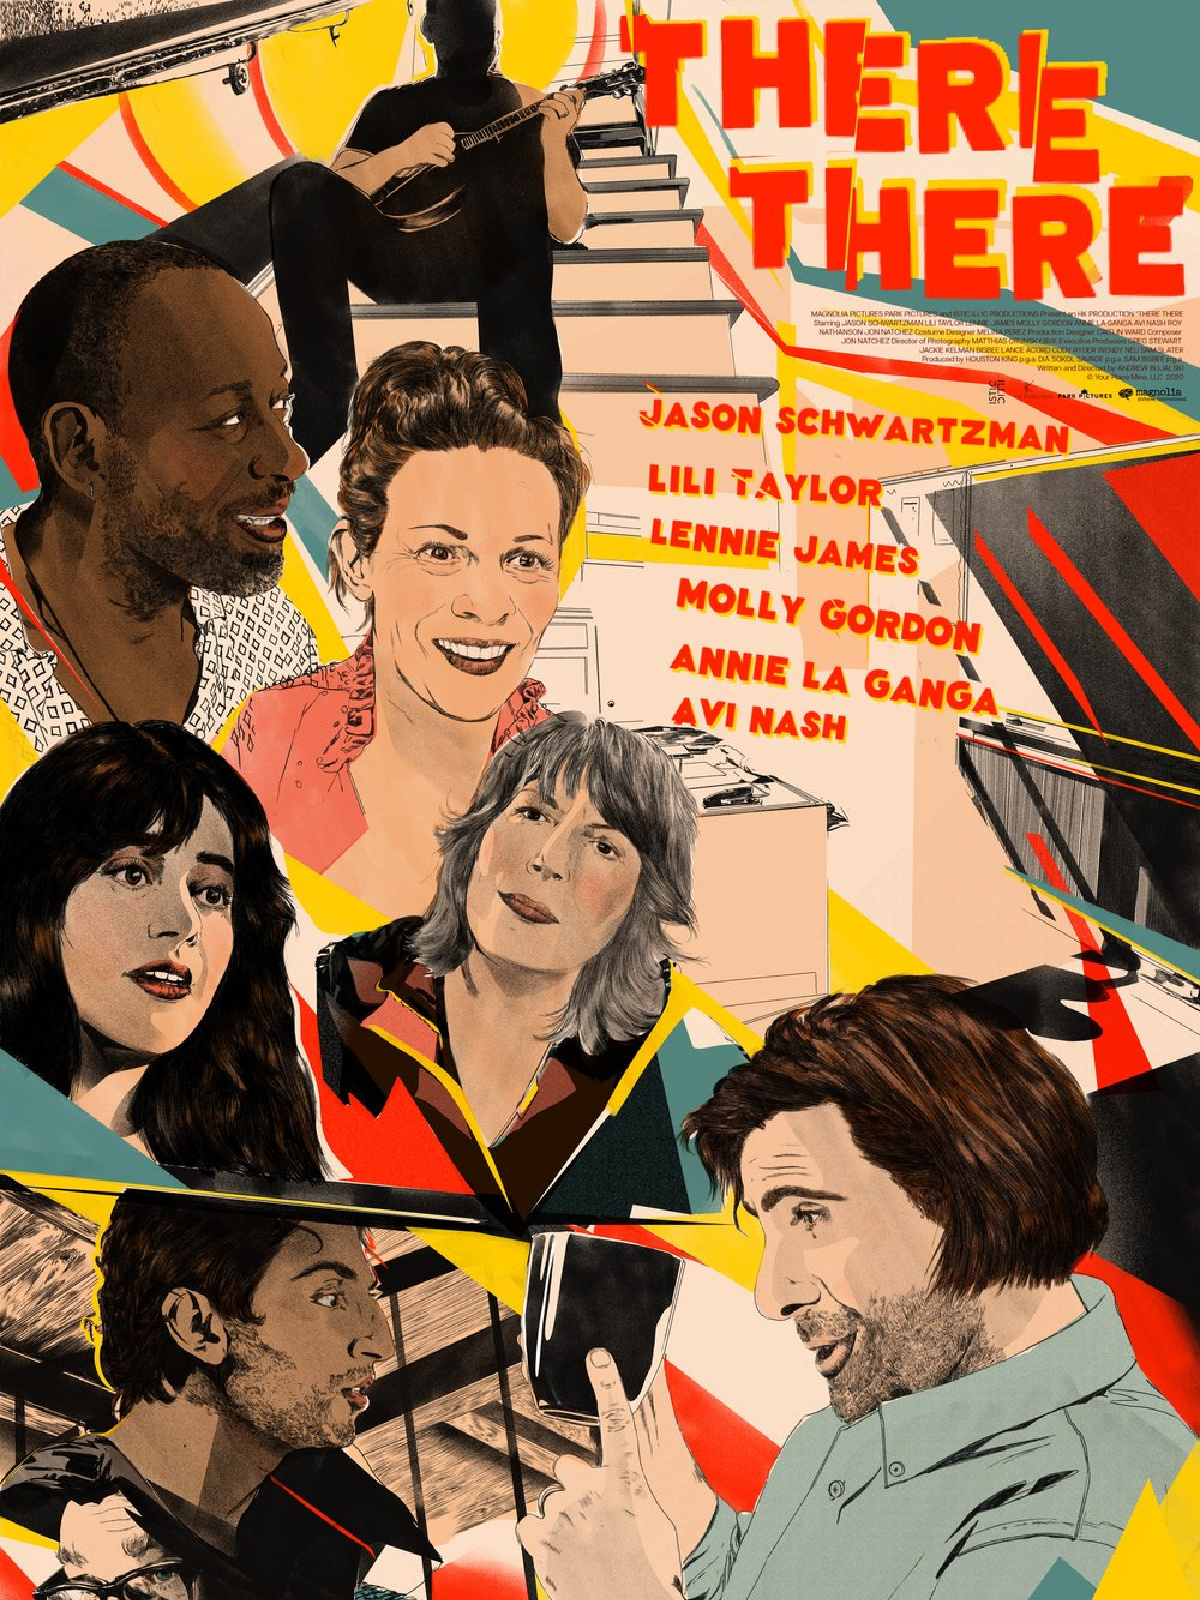 Theatrical one-sheet for THERE THERE, a Magnolia Pictures release.